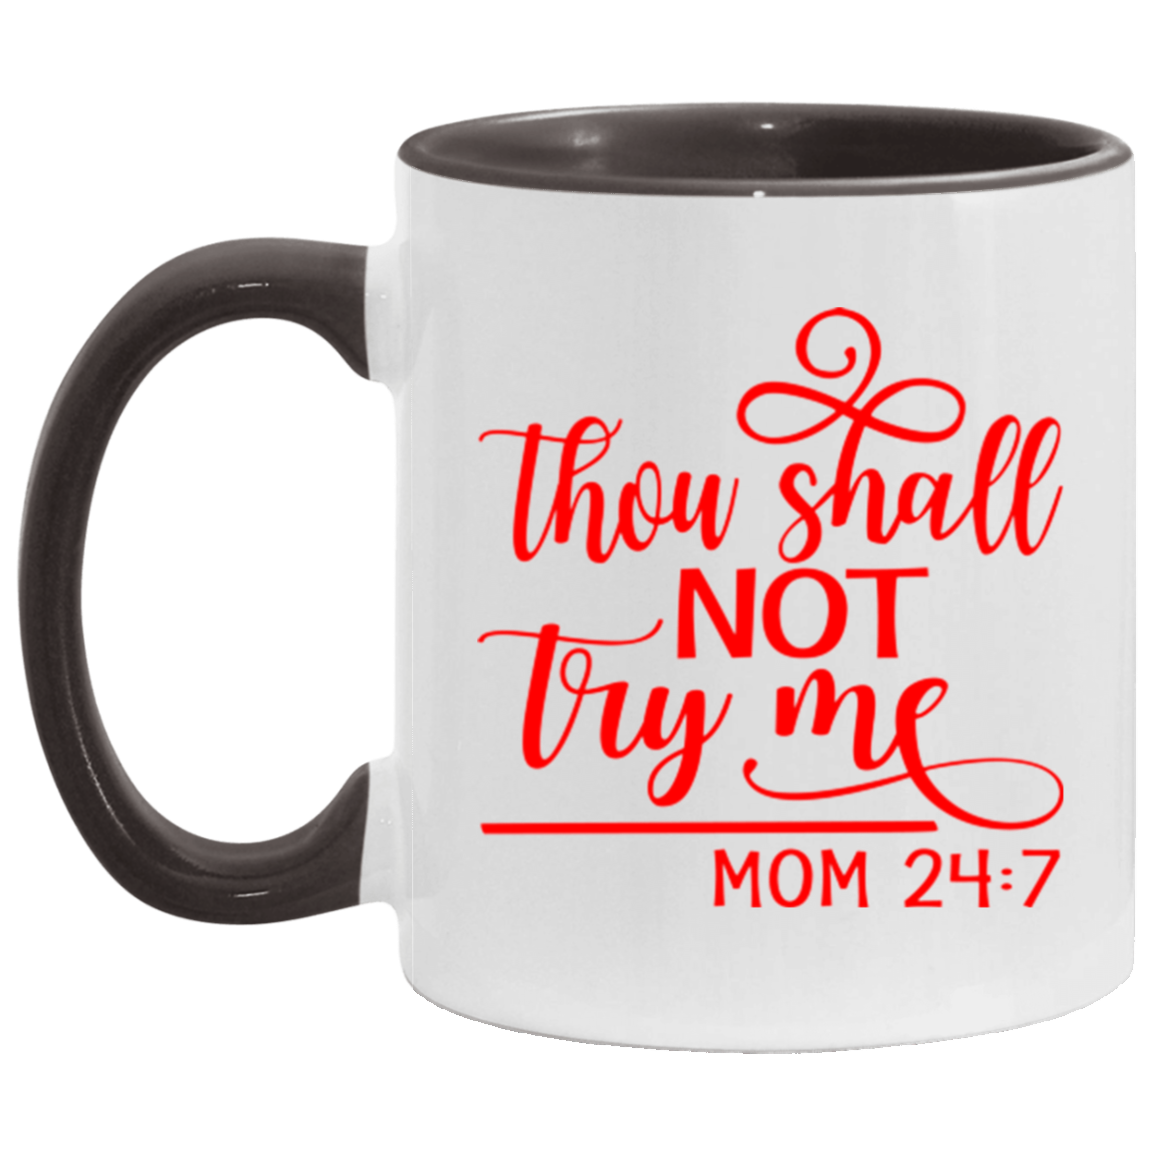 AM11OZ Mom-Don't Try Me Accent Mug